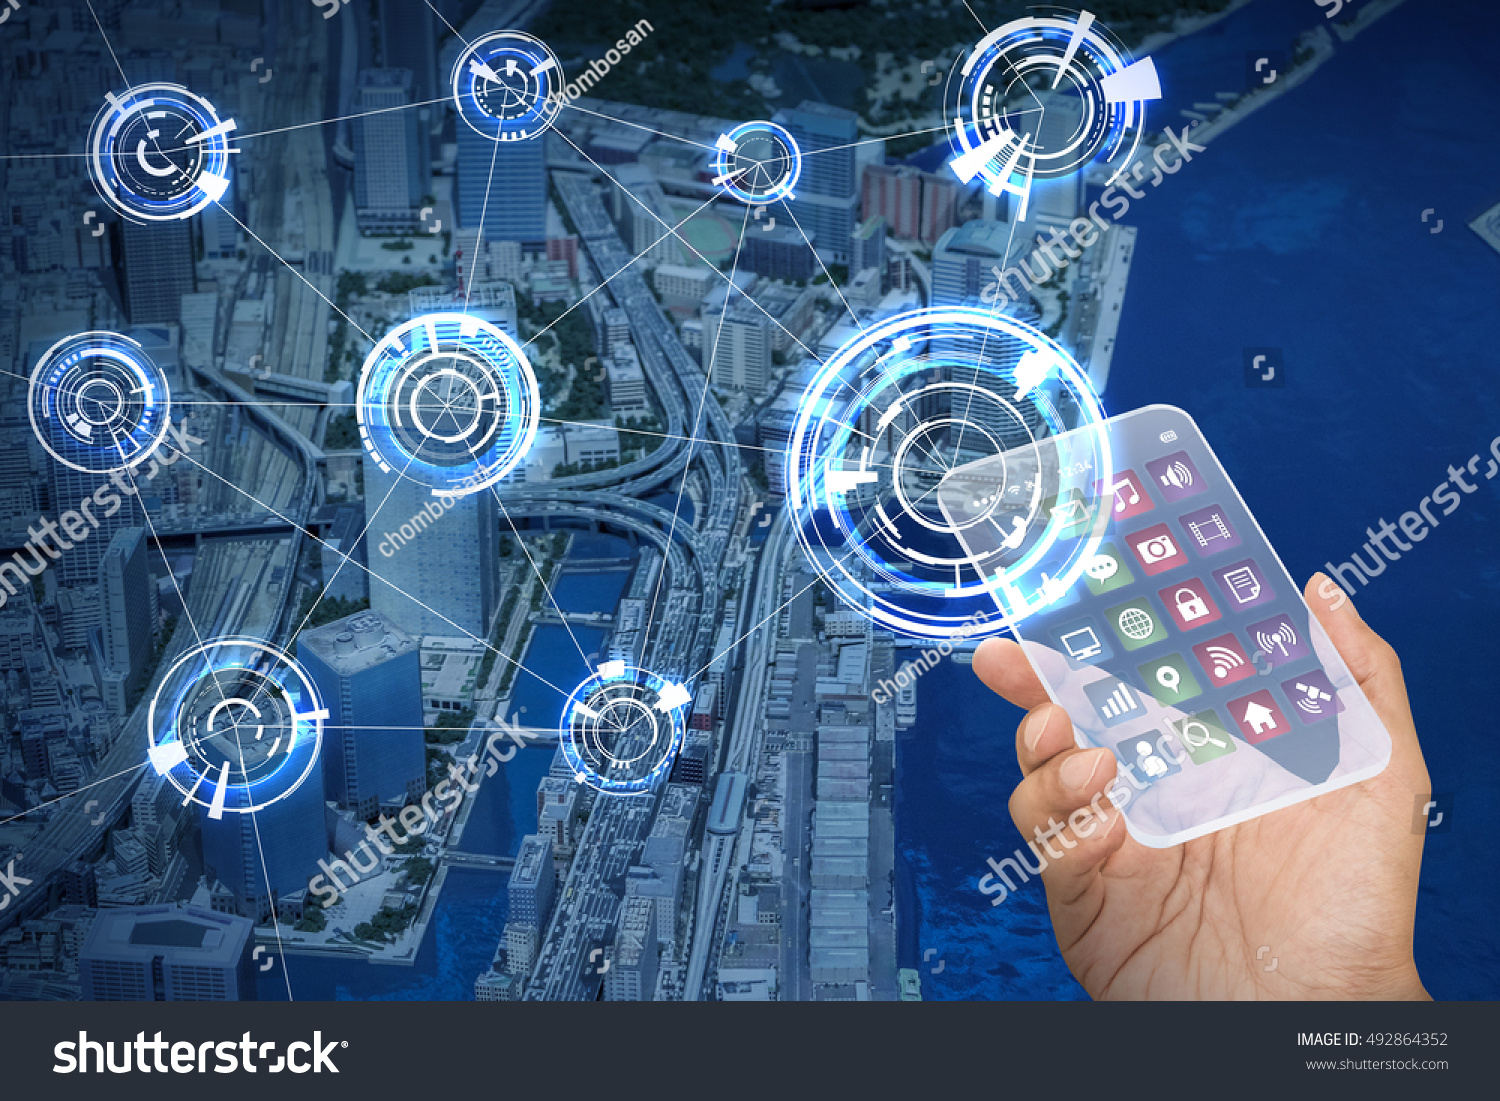 futuristic smart phone and wireless communication network, smart city, Internet of Things, abstract image visual #492864352